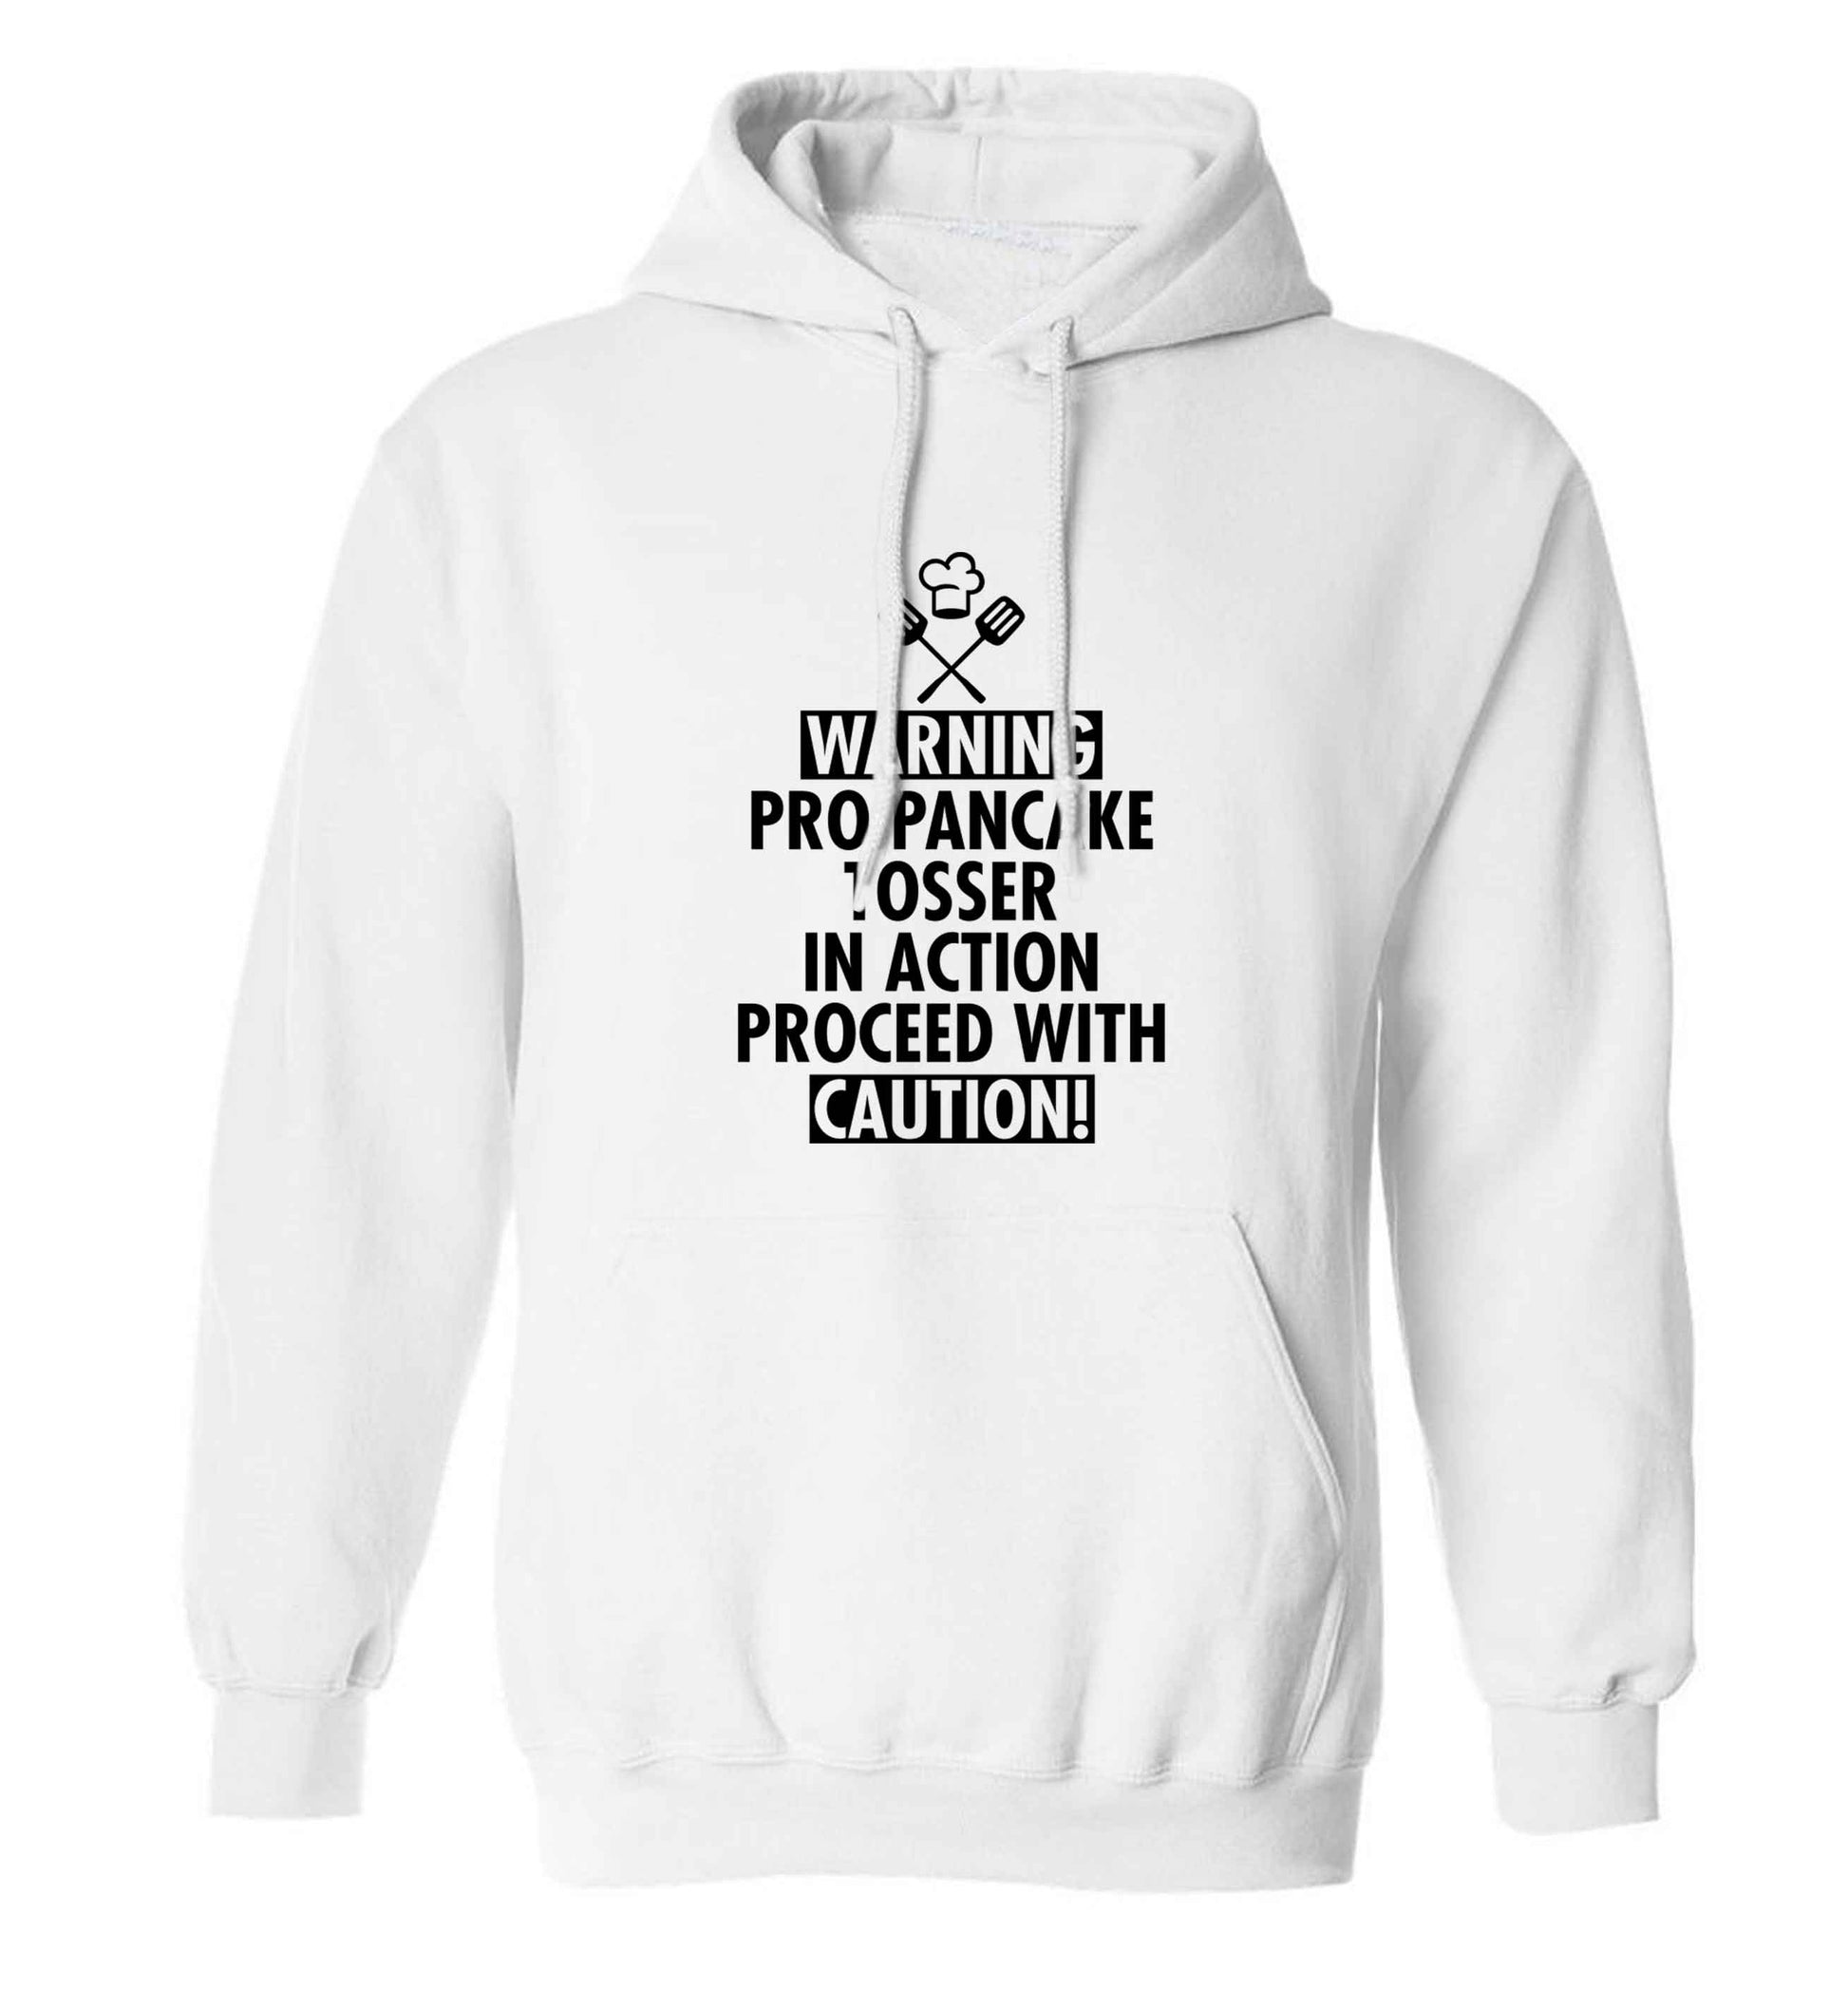 Warning pro pancake tosser in action proceed with caution adults unisex white hoodie 2XL